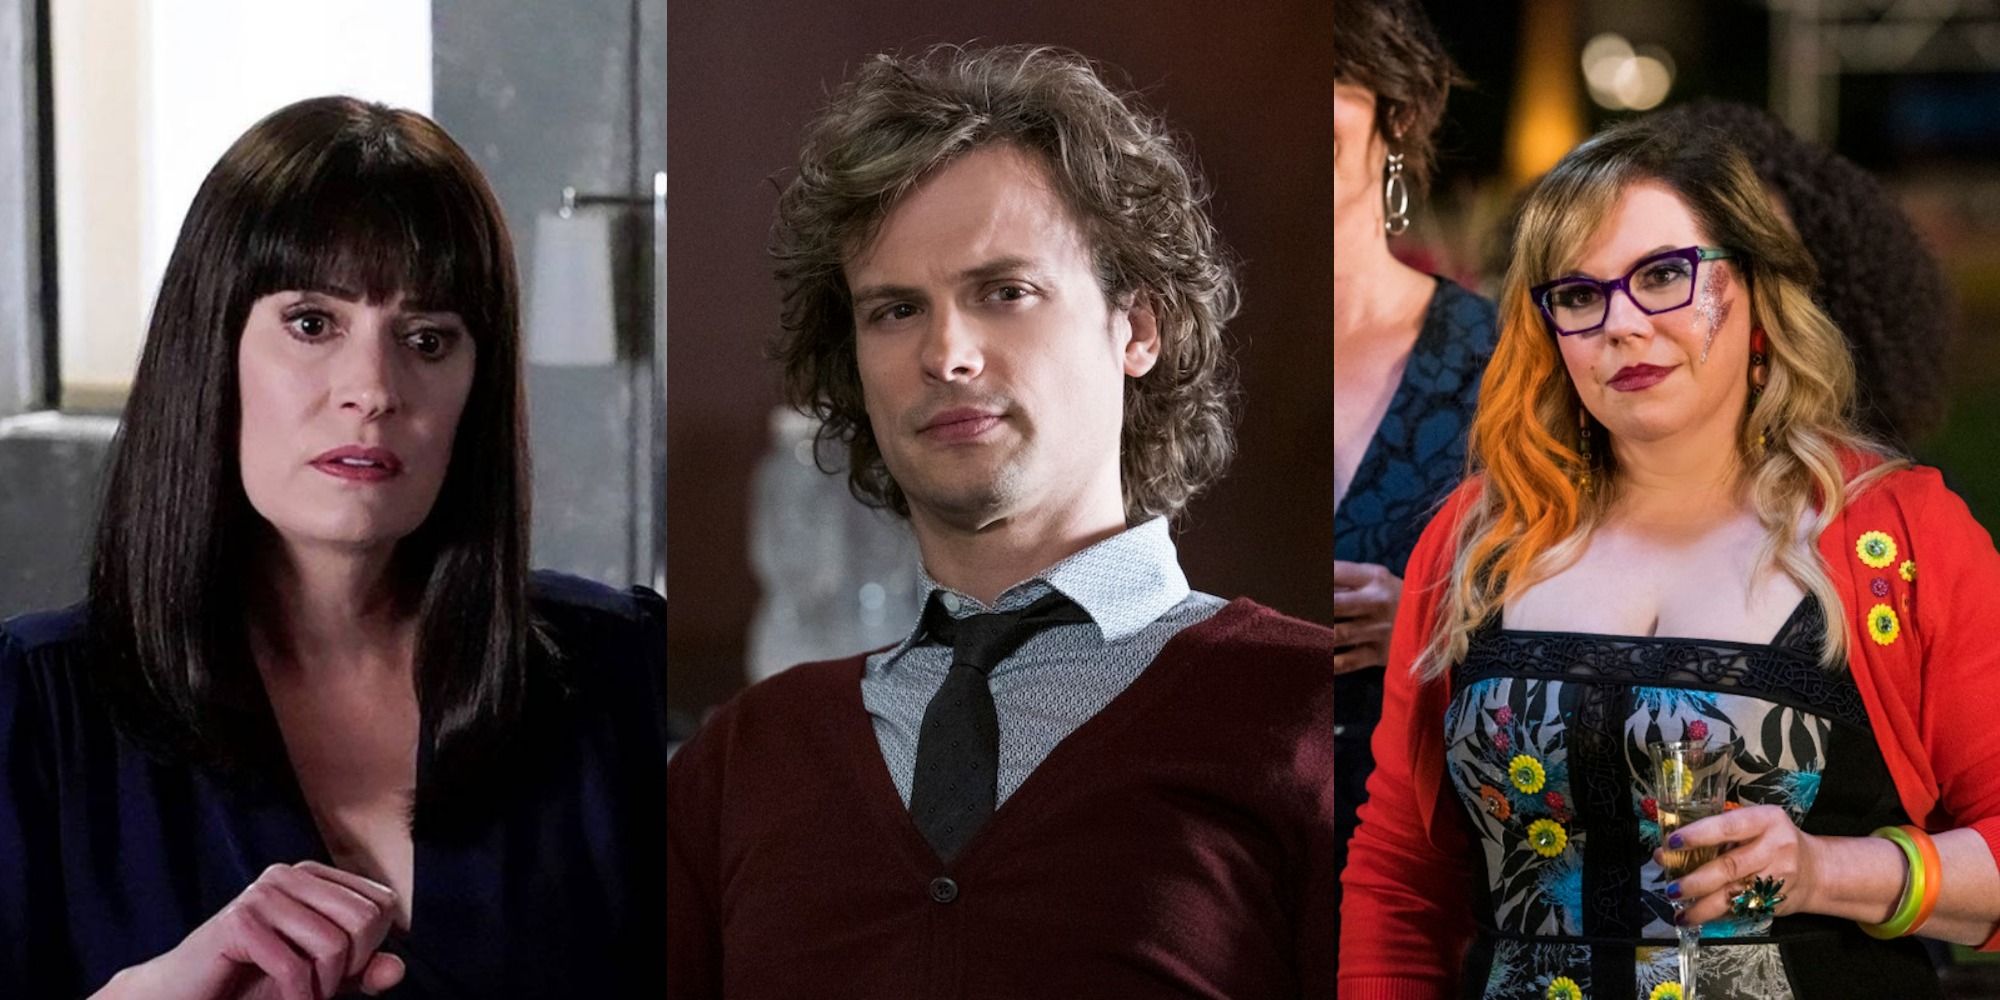 Criminal Minds The Best Episode From Each Season, According To IMDb